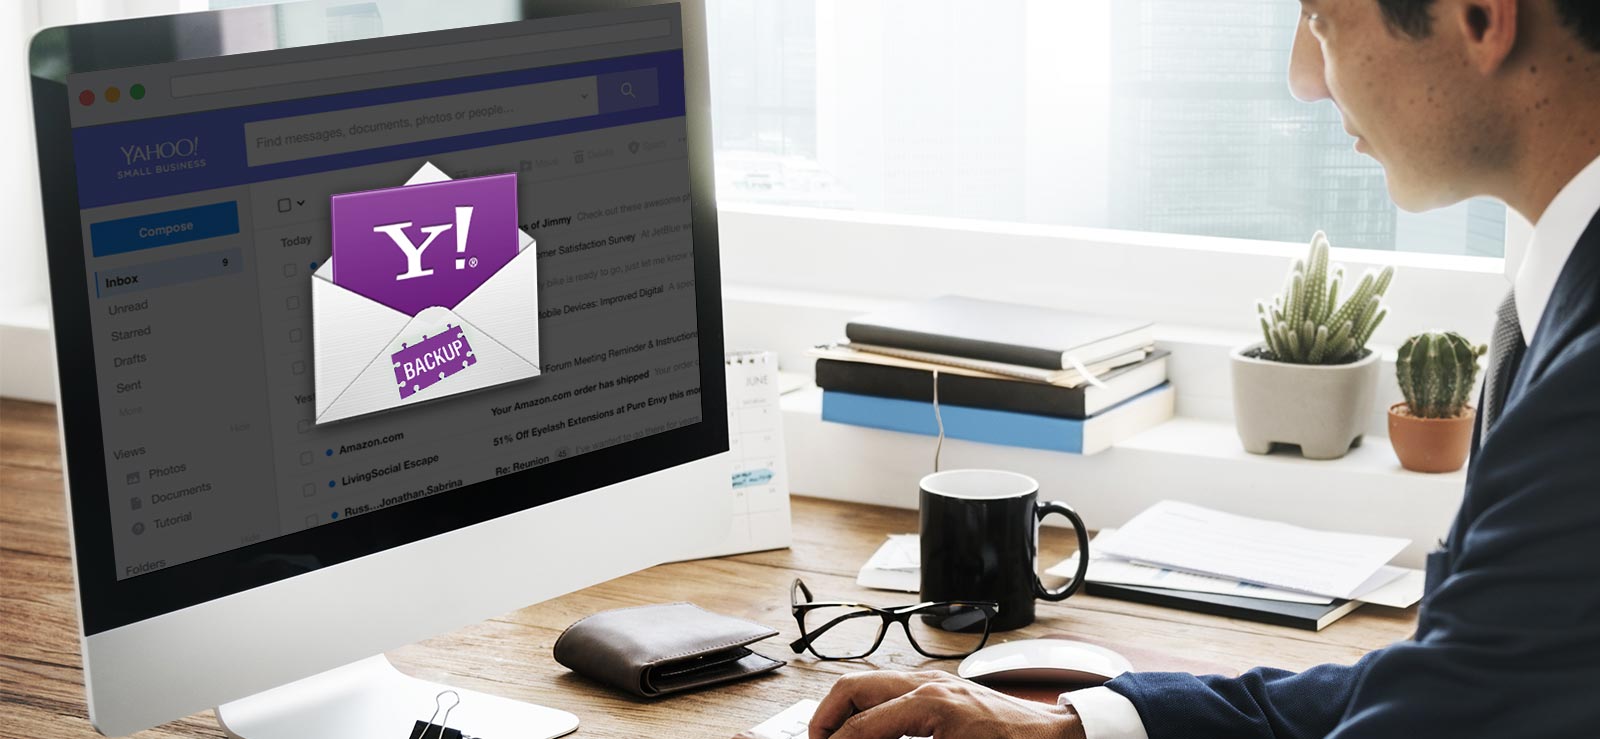 How to Backup Yahoo Emails to PC?